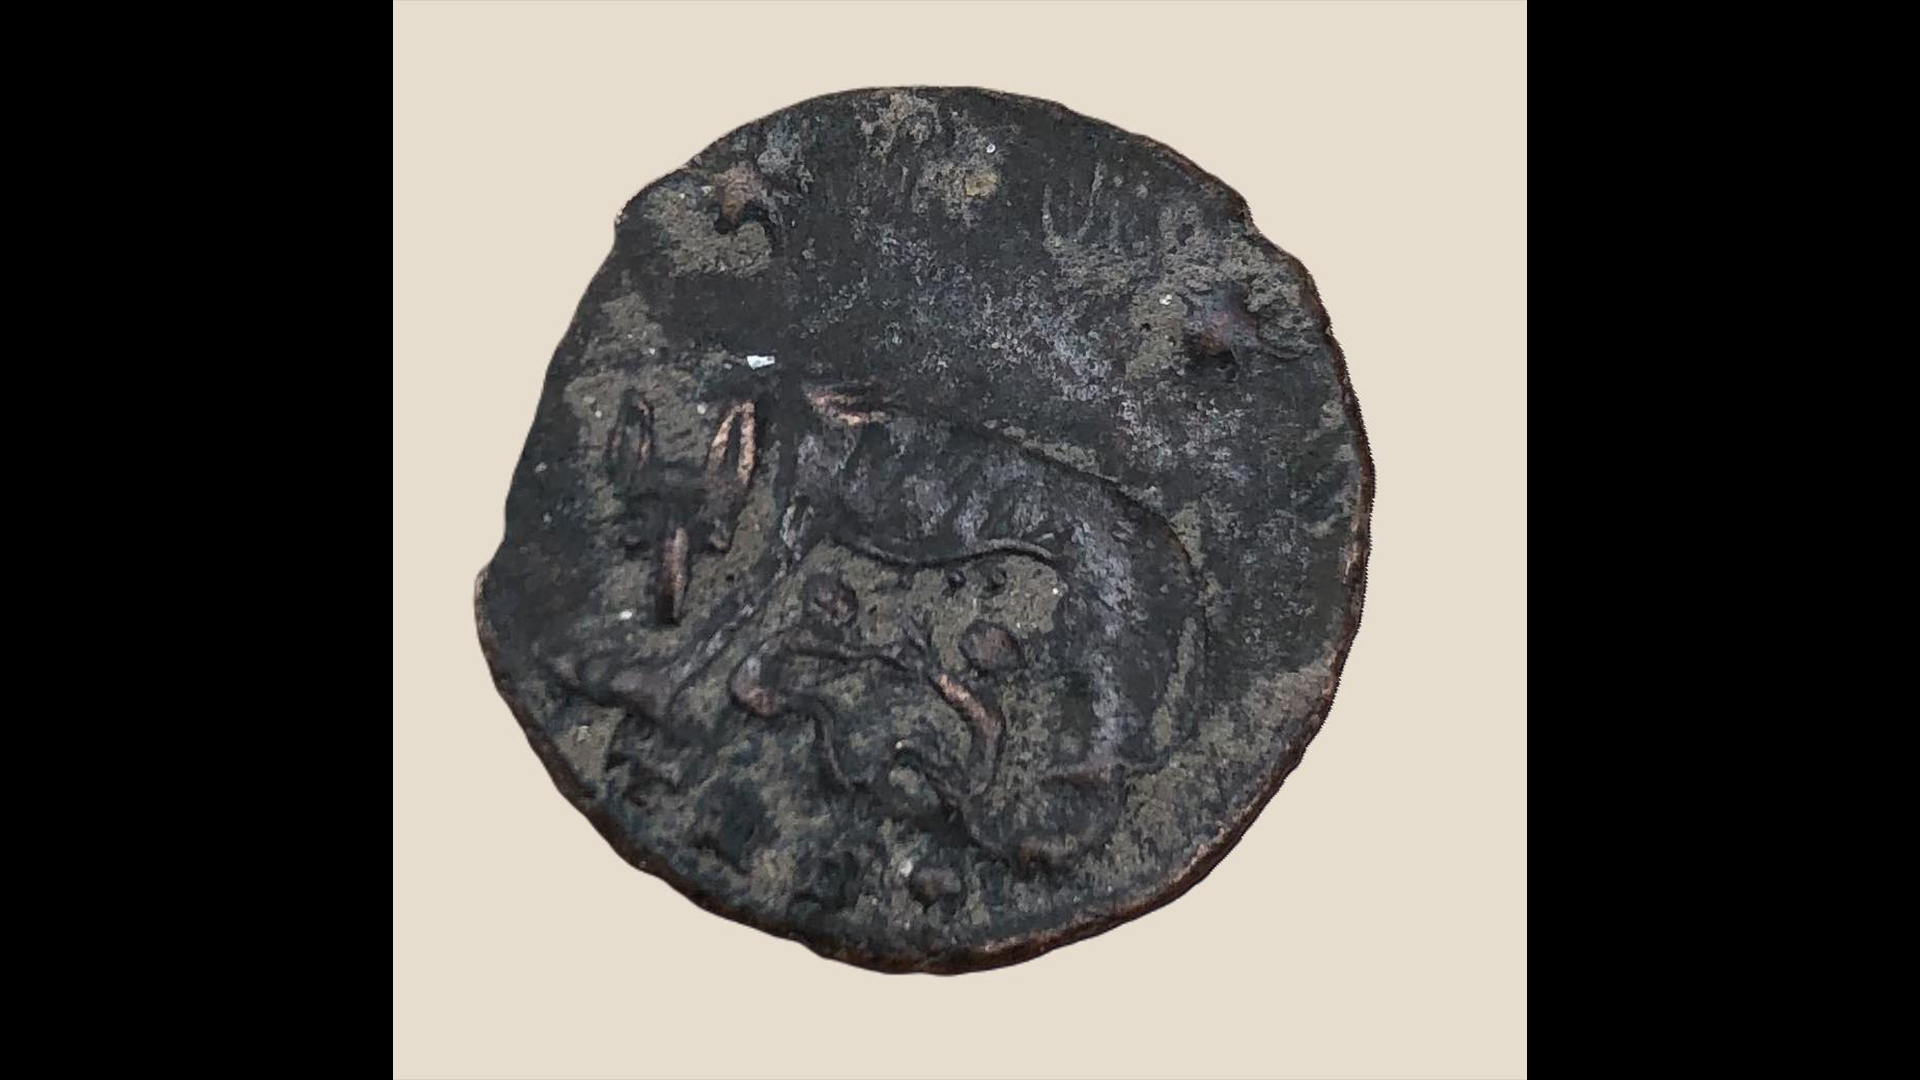 The archaeologists have also found several coins at the site, including this portraying the Roman myth of Romulus and Remus being suckled by a she-wolf.